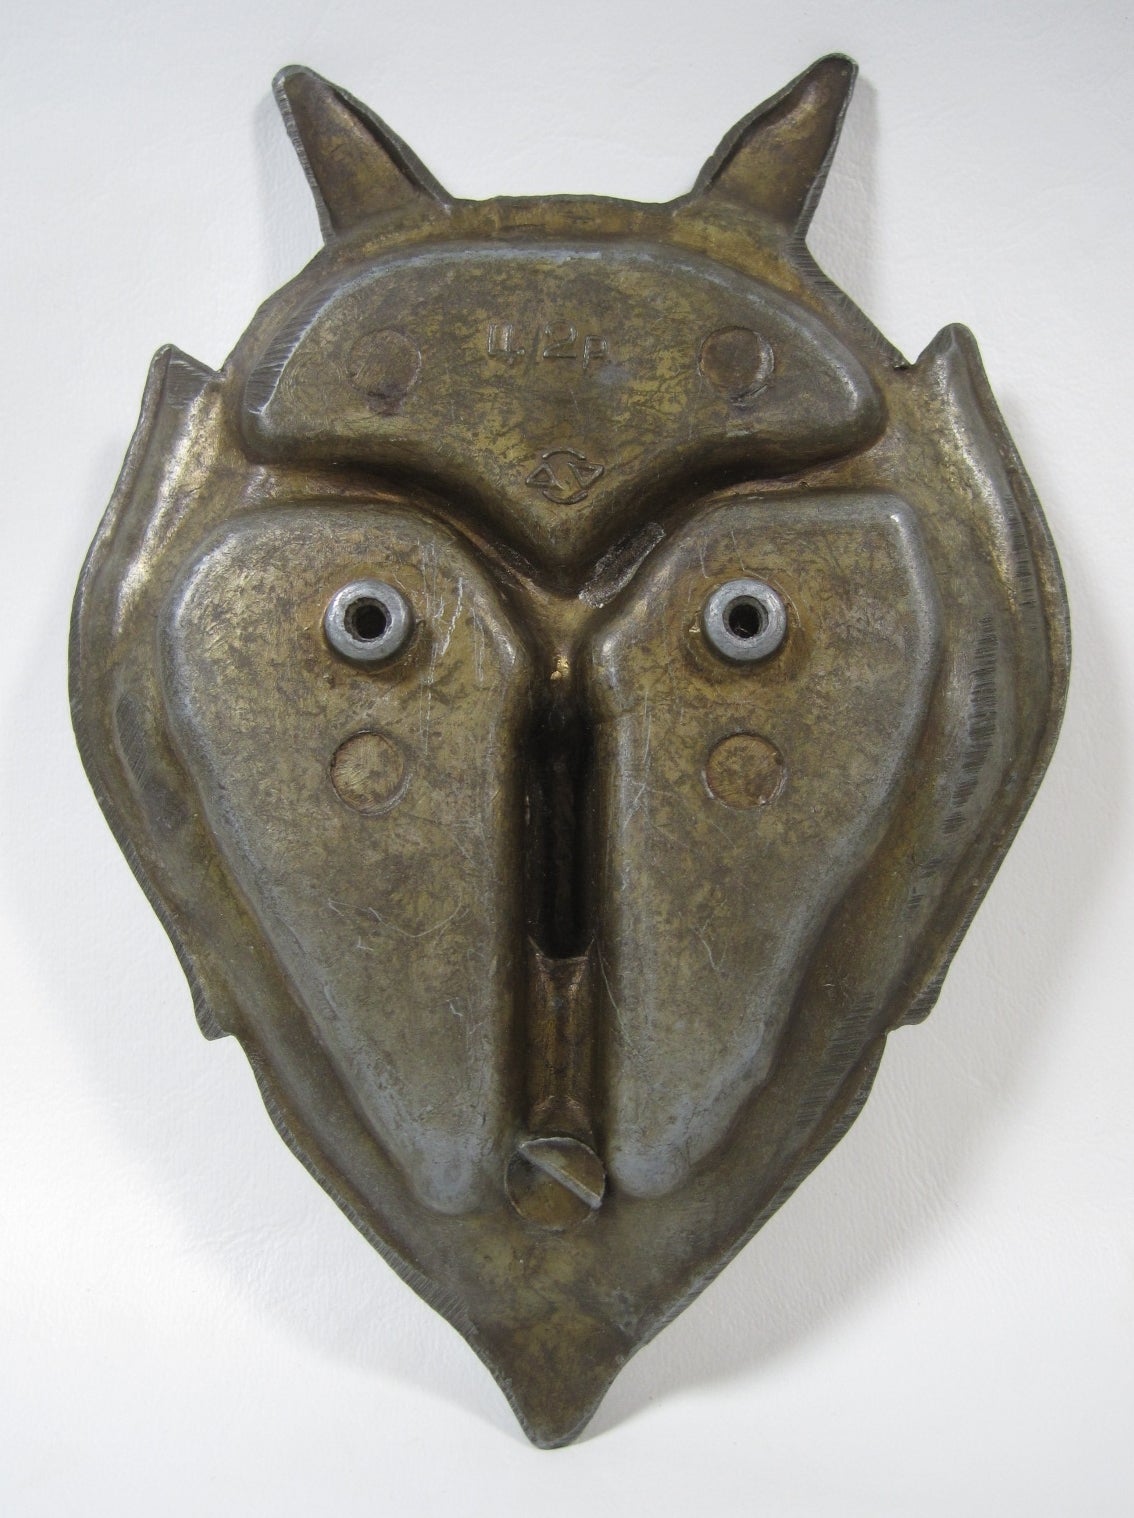 Russian Horned Devil Head Ashtray, Metalware

Shipping within the United States and Canada is free.